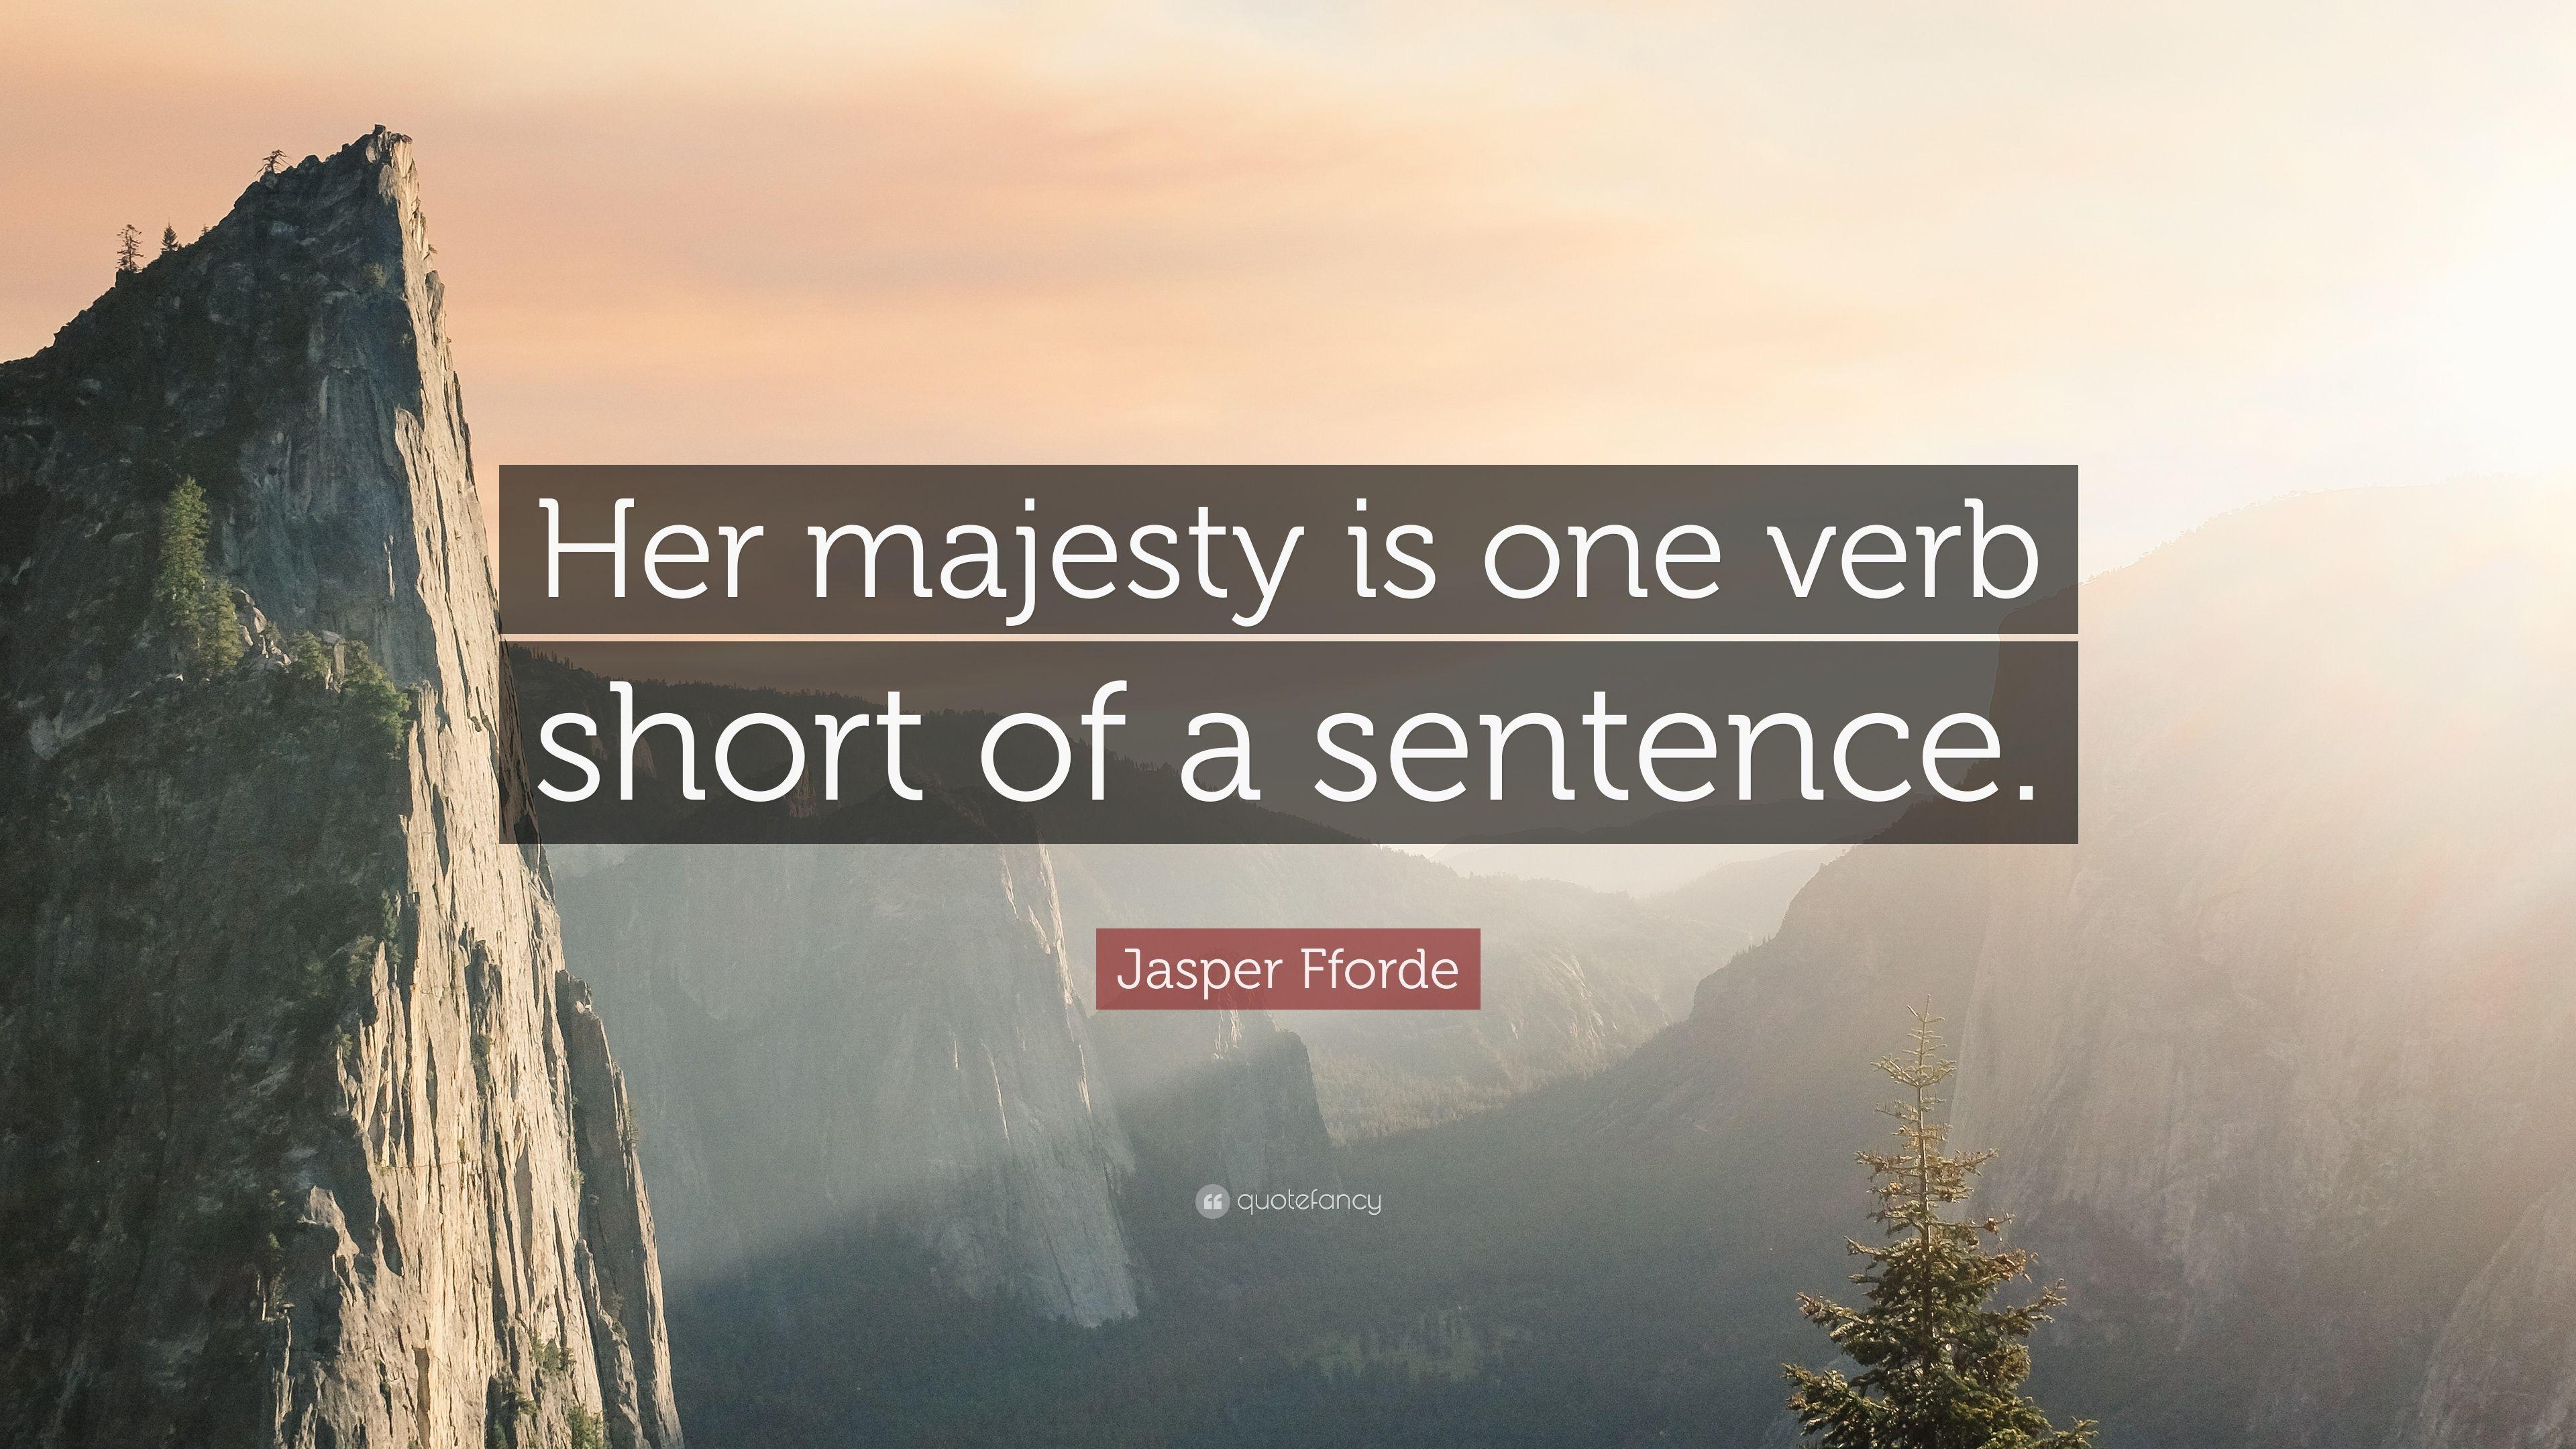 Jasper Fforde Quote: “Her majesty is one verb short of a sentence